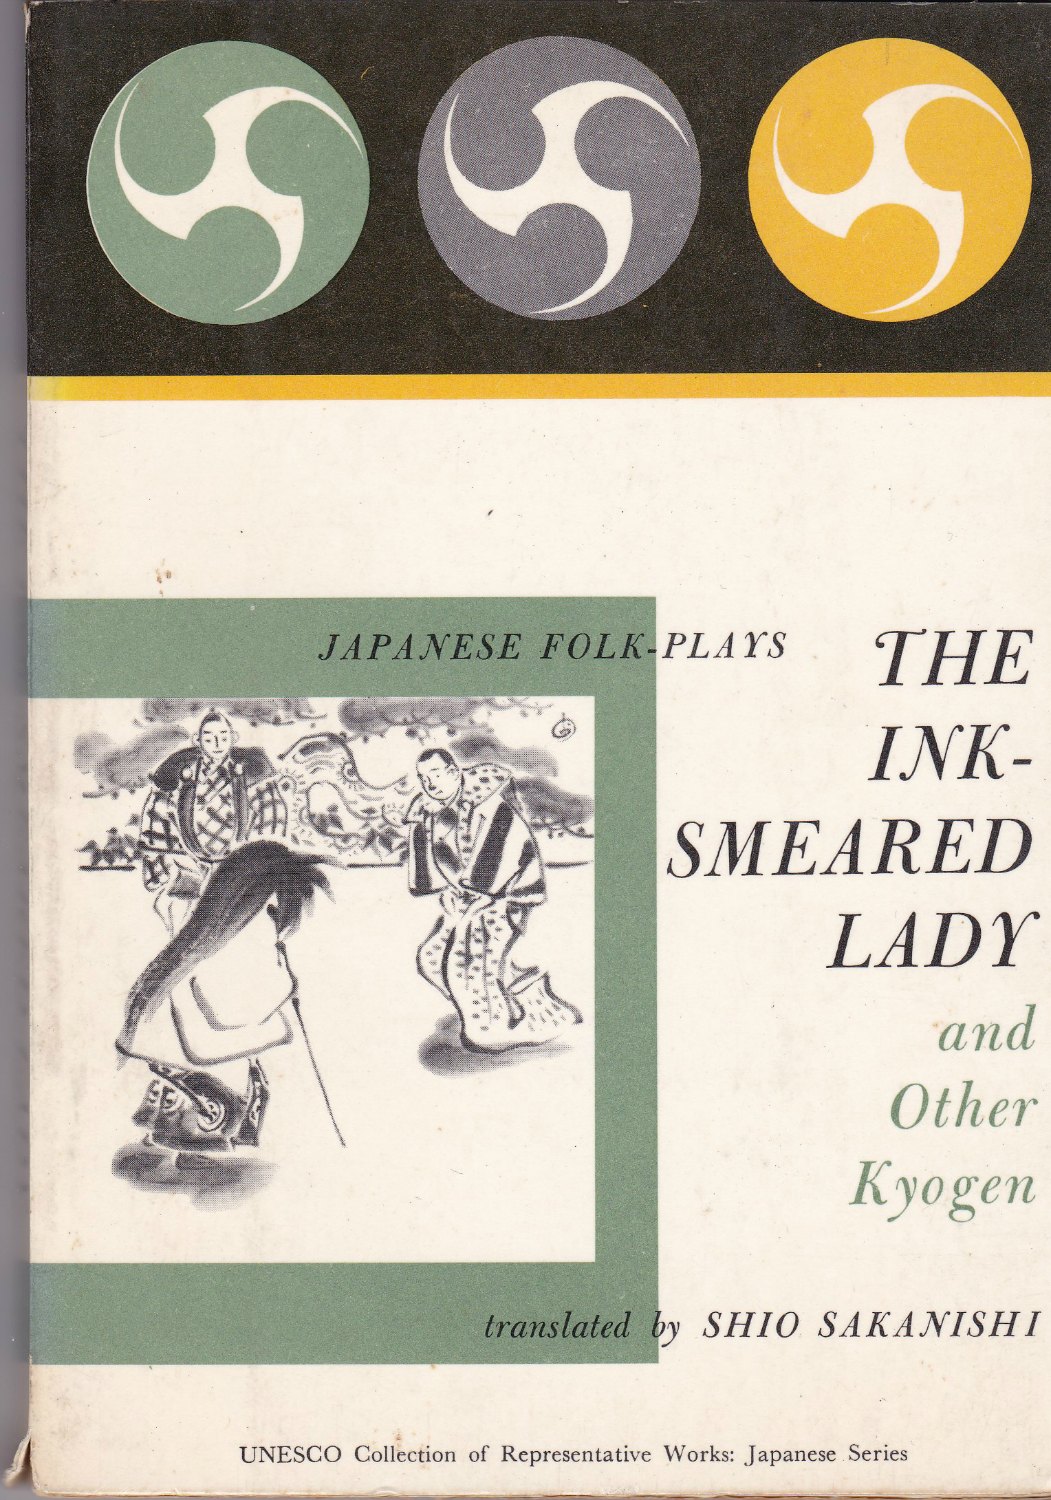 Japanese folk-plays : the Ink-smeared lady, and other kyogen.　狂言